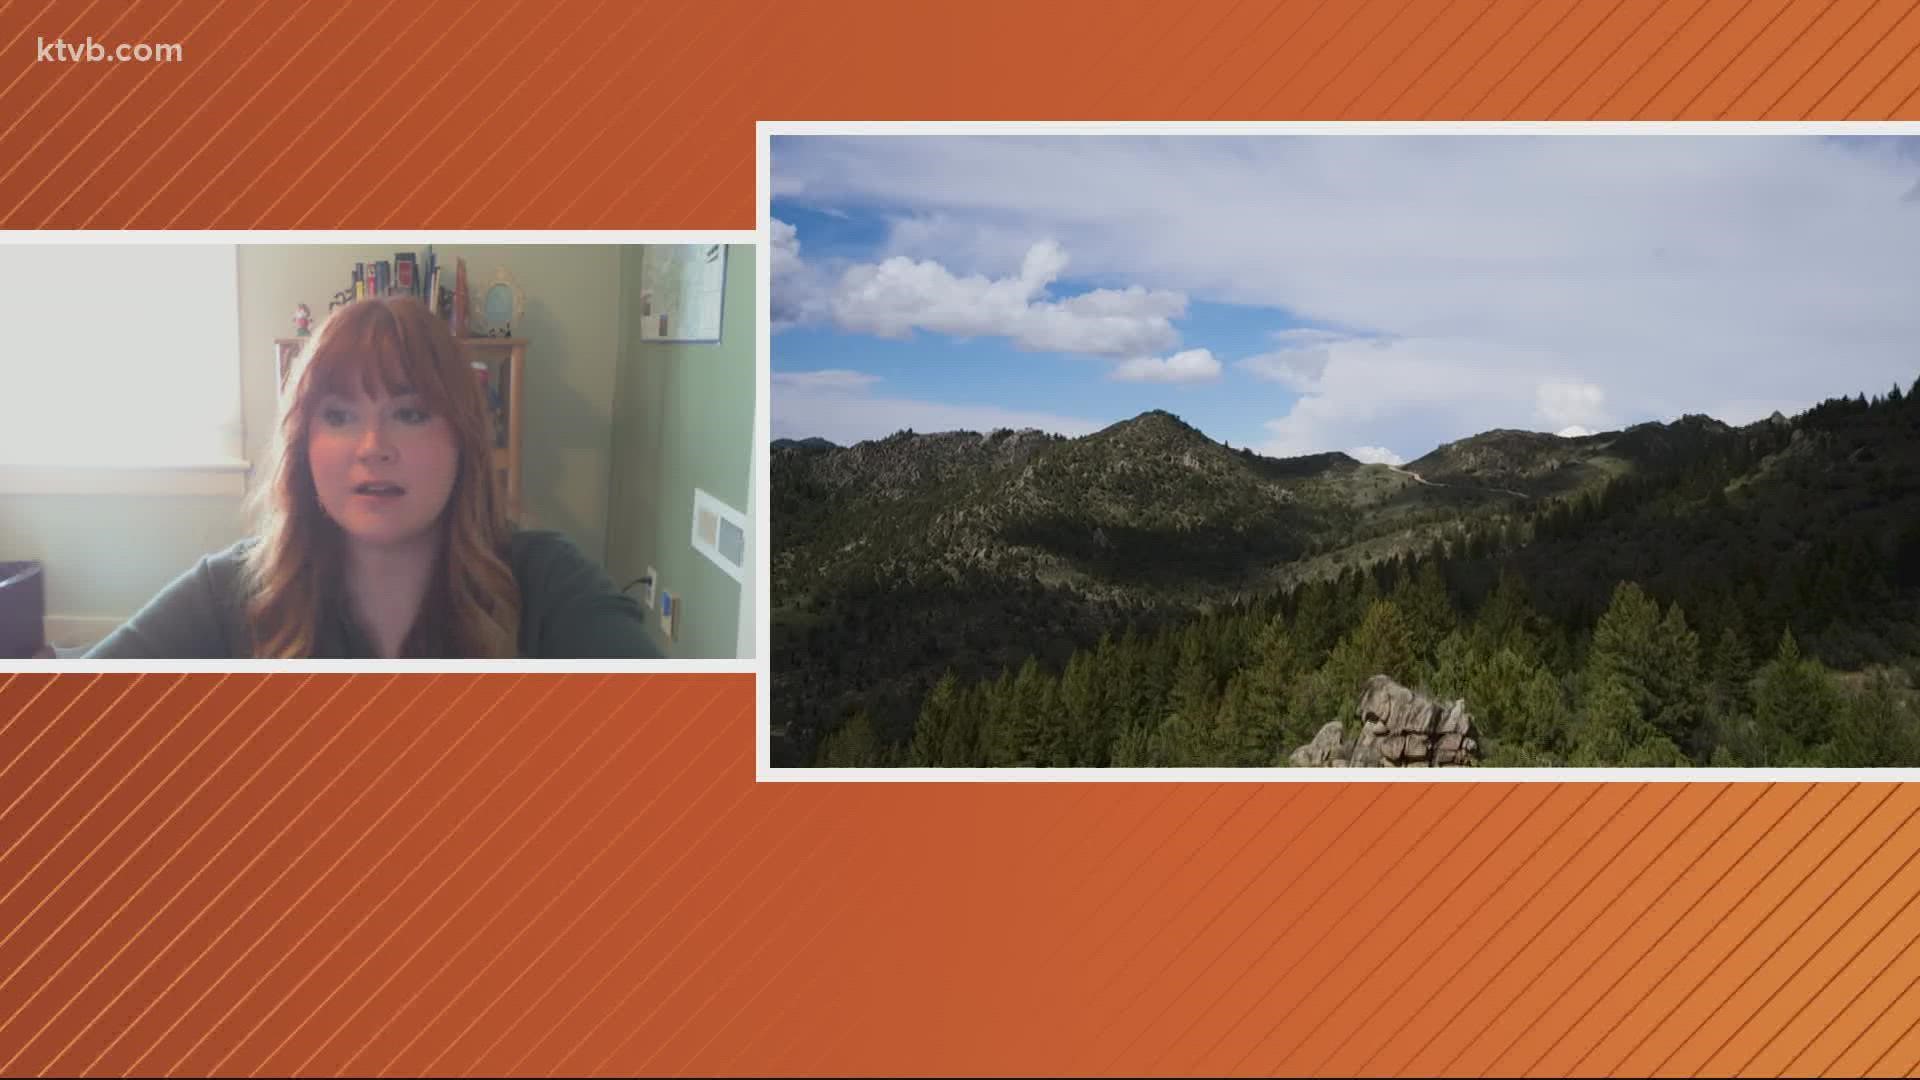 Dainee Gibson-Webb, a conservation analyst with the Idaho Conservation League, joins KTVB on Earth Day to discuss how each person can help protect our planet.